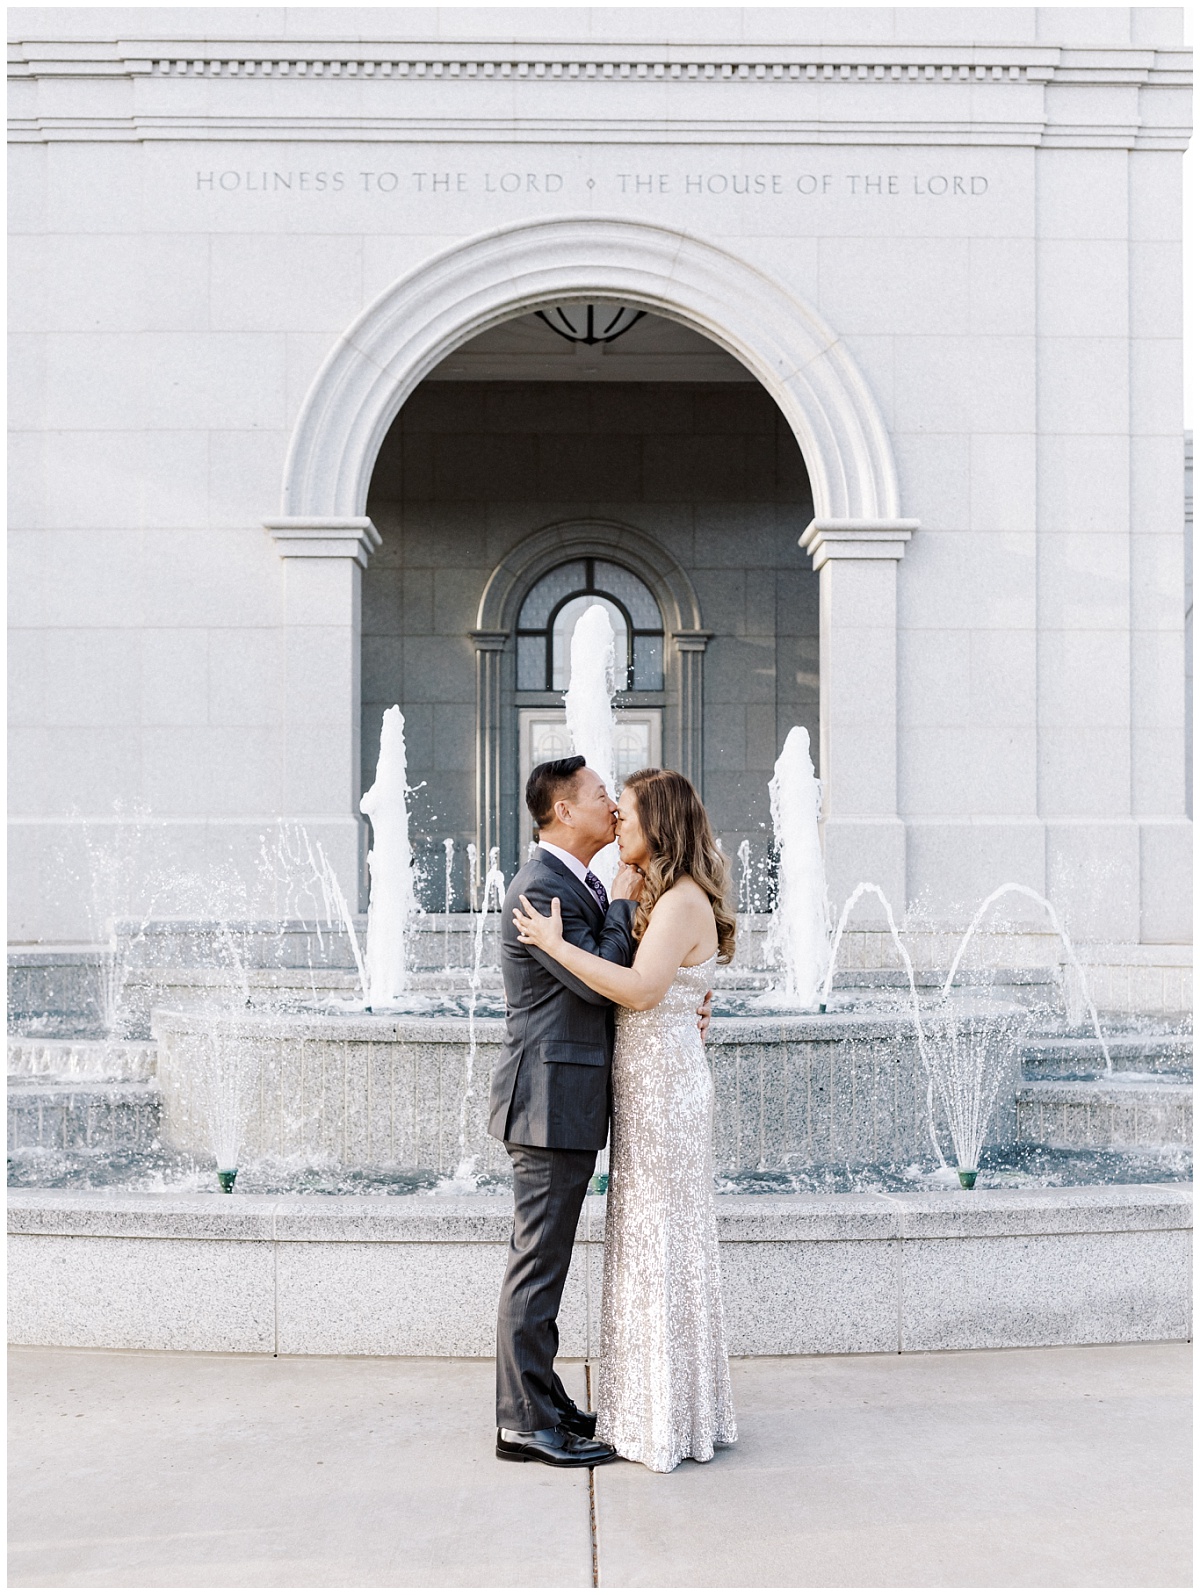 Intimate Posing Ideas for Engagement Photos